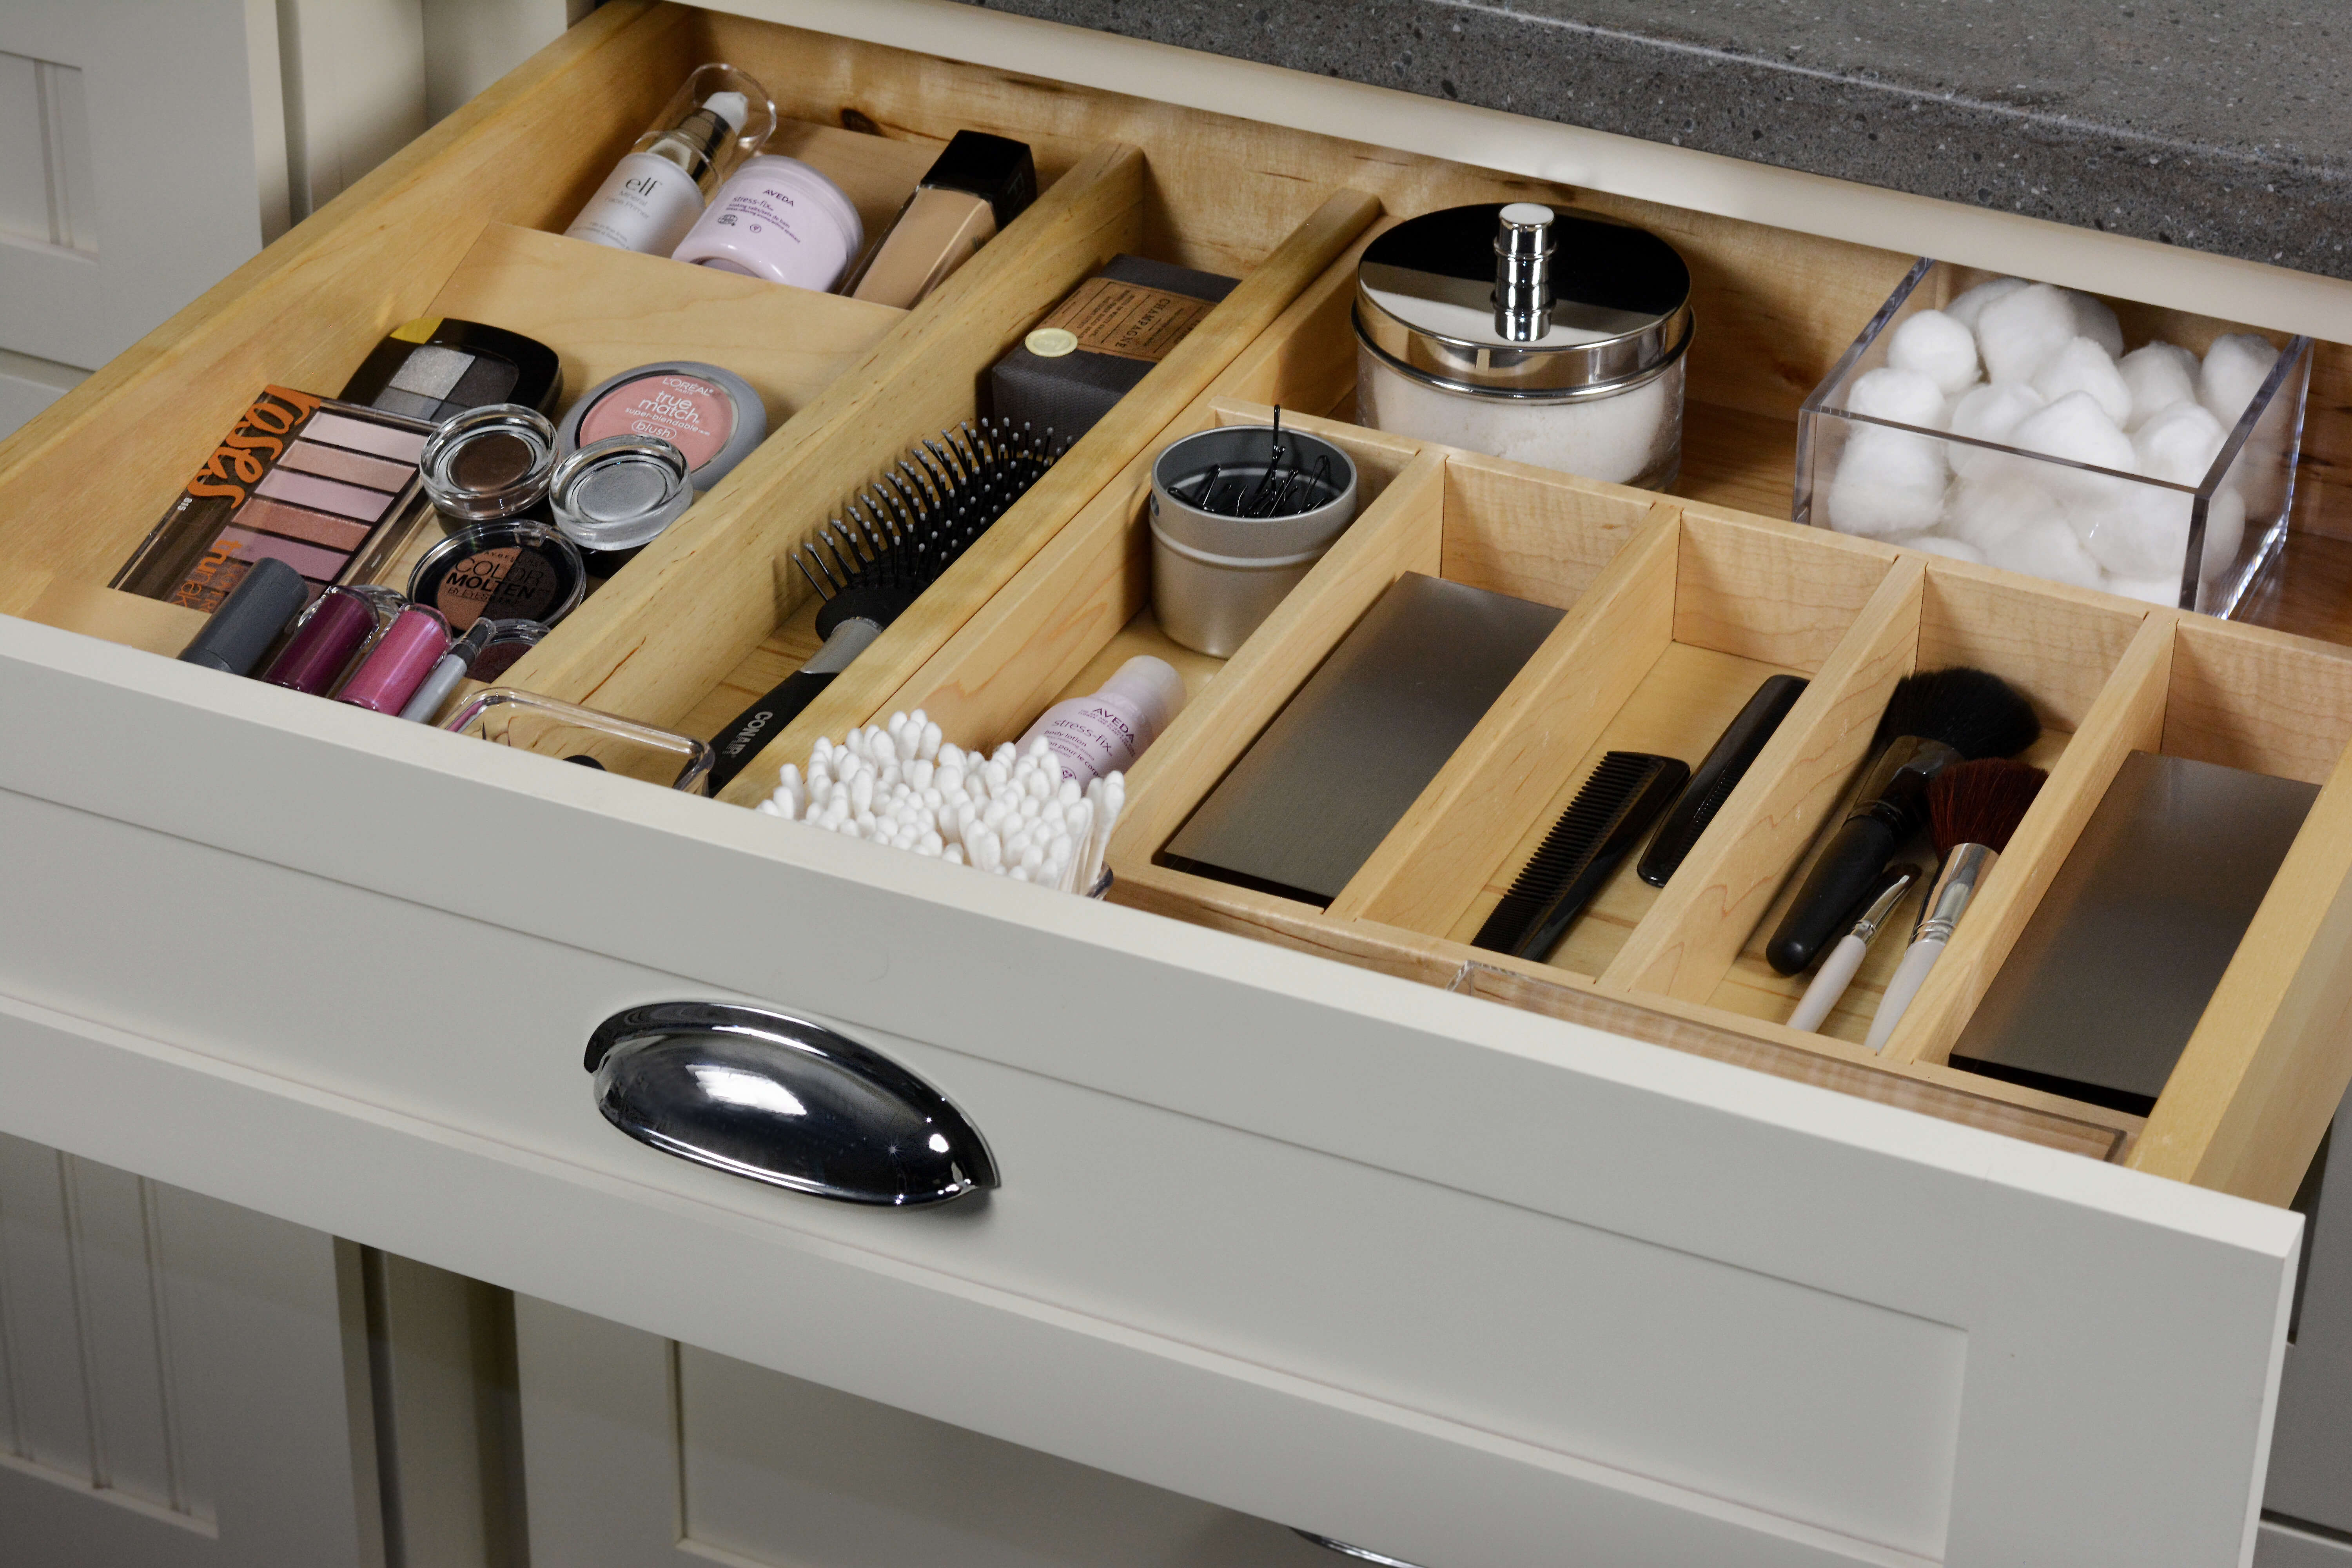 Cutlery Divider Tray, Spice Rack, and Partitions (For Other Rooms)